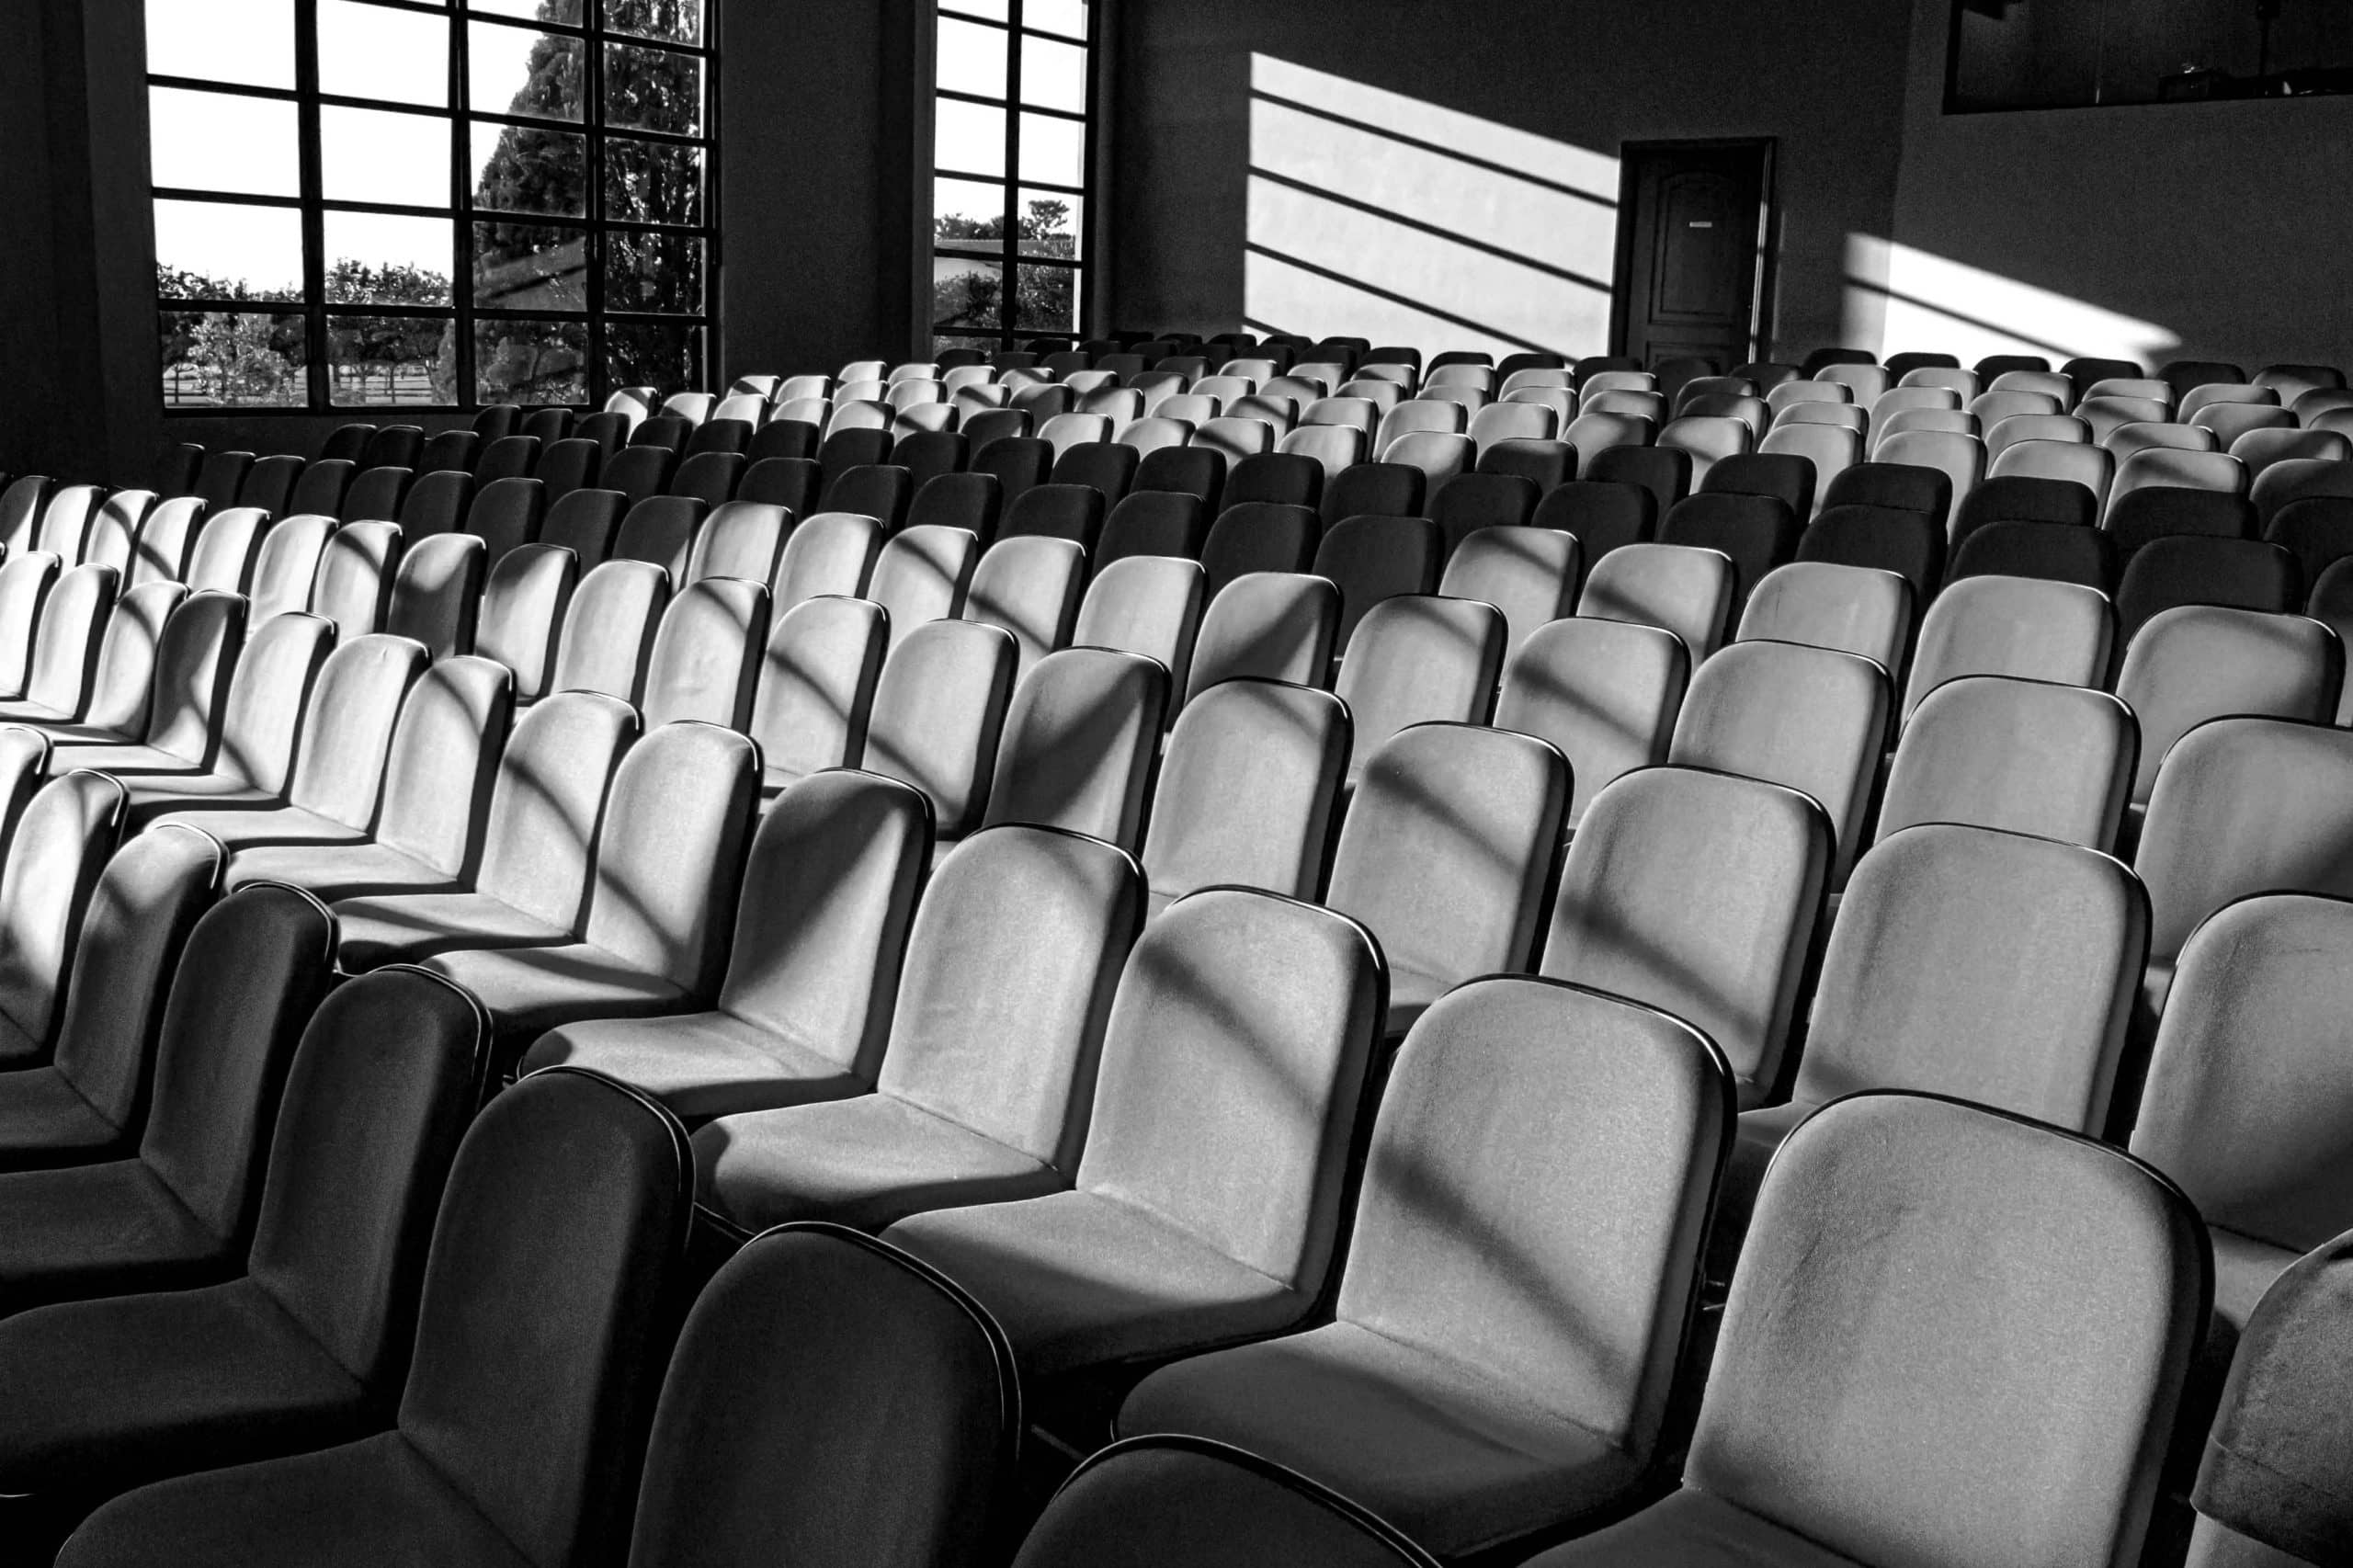 An amphitheater with empty chairs for audience